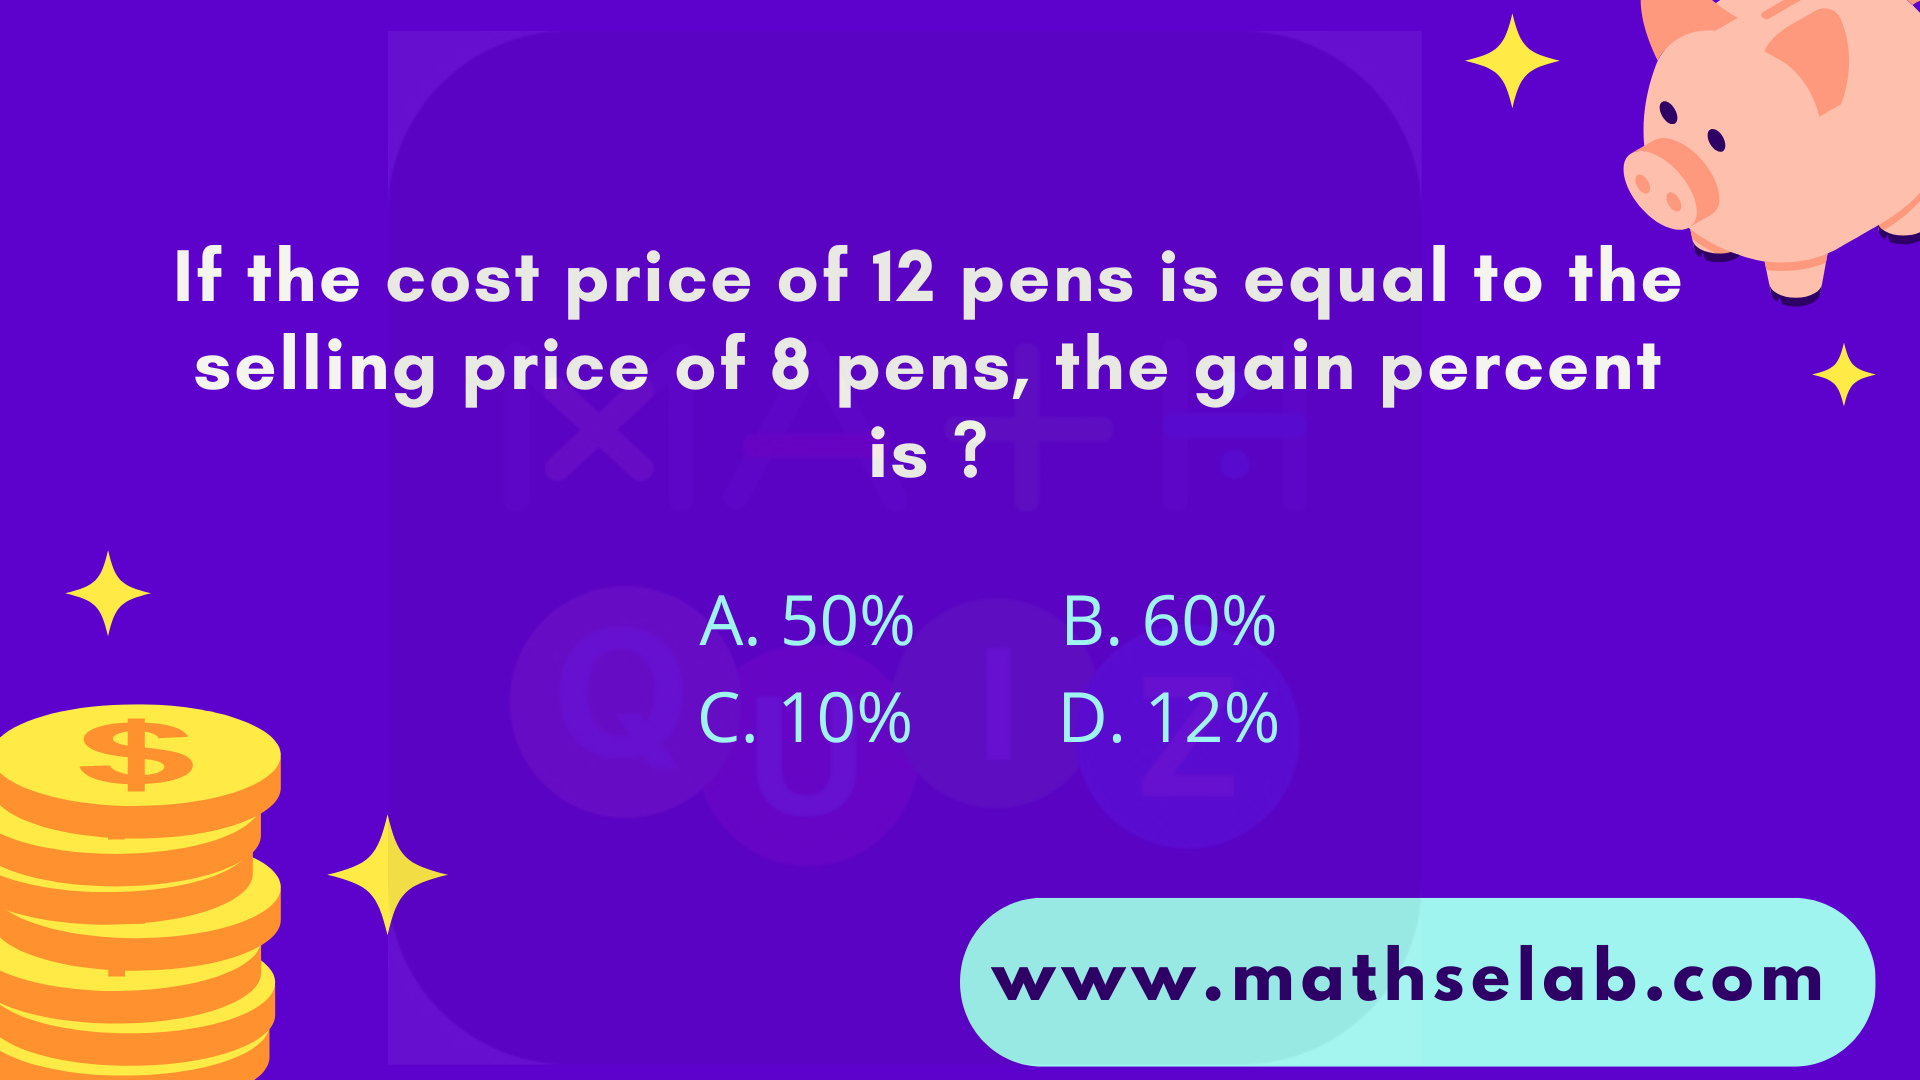 If the cost price of 12 pens is equal to the selling price of 8 pens, the gain percent is - www.mathselab.com